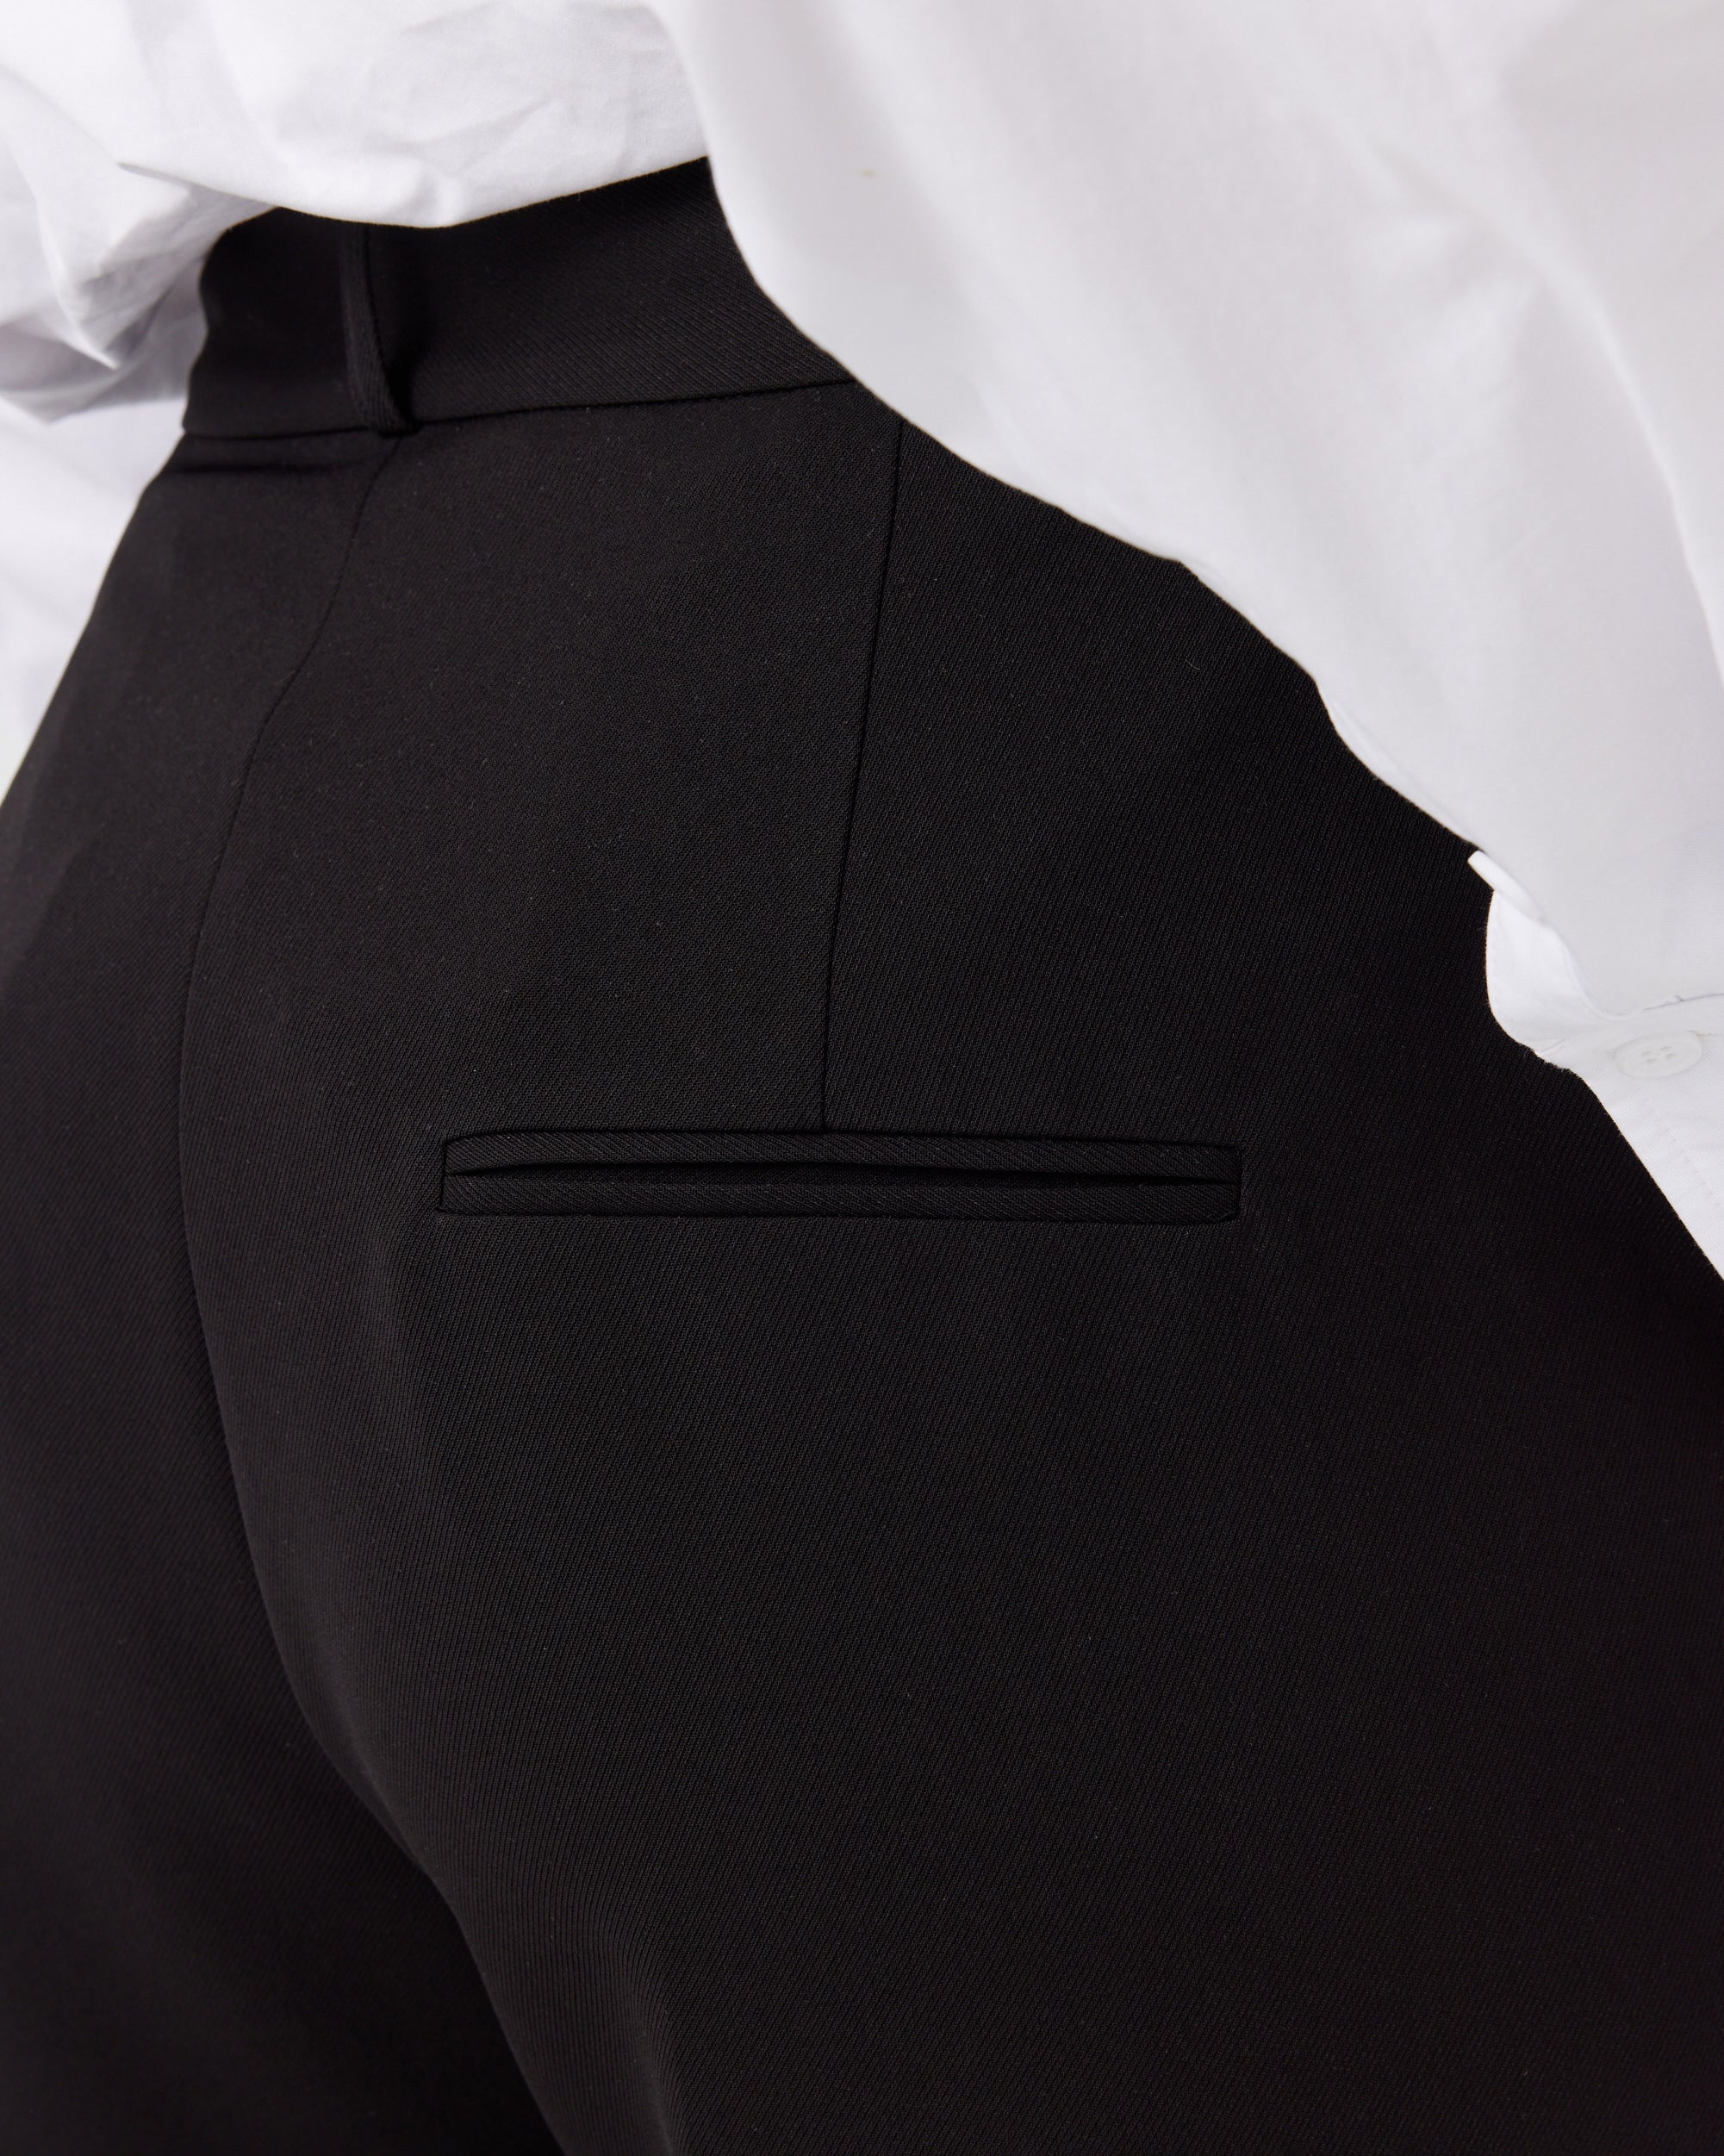 Close up photograph of a curvaceous woman wearing a pair of minimalistic high waisted black wide leg trousers. Photograph shows the back pocket detail of the trousers